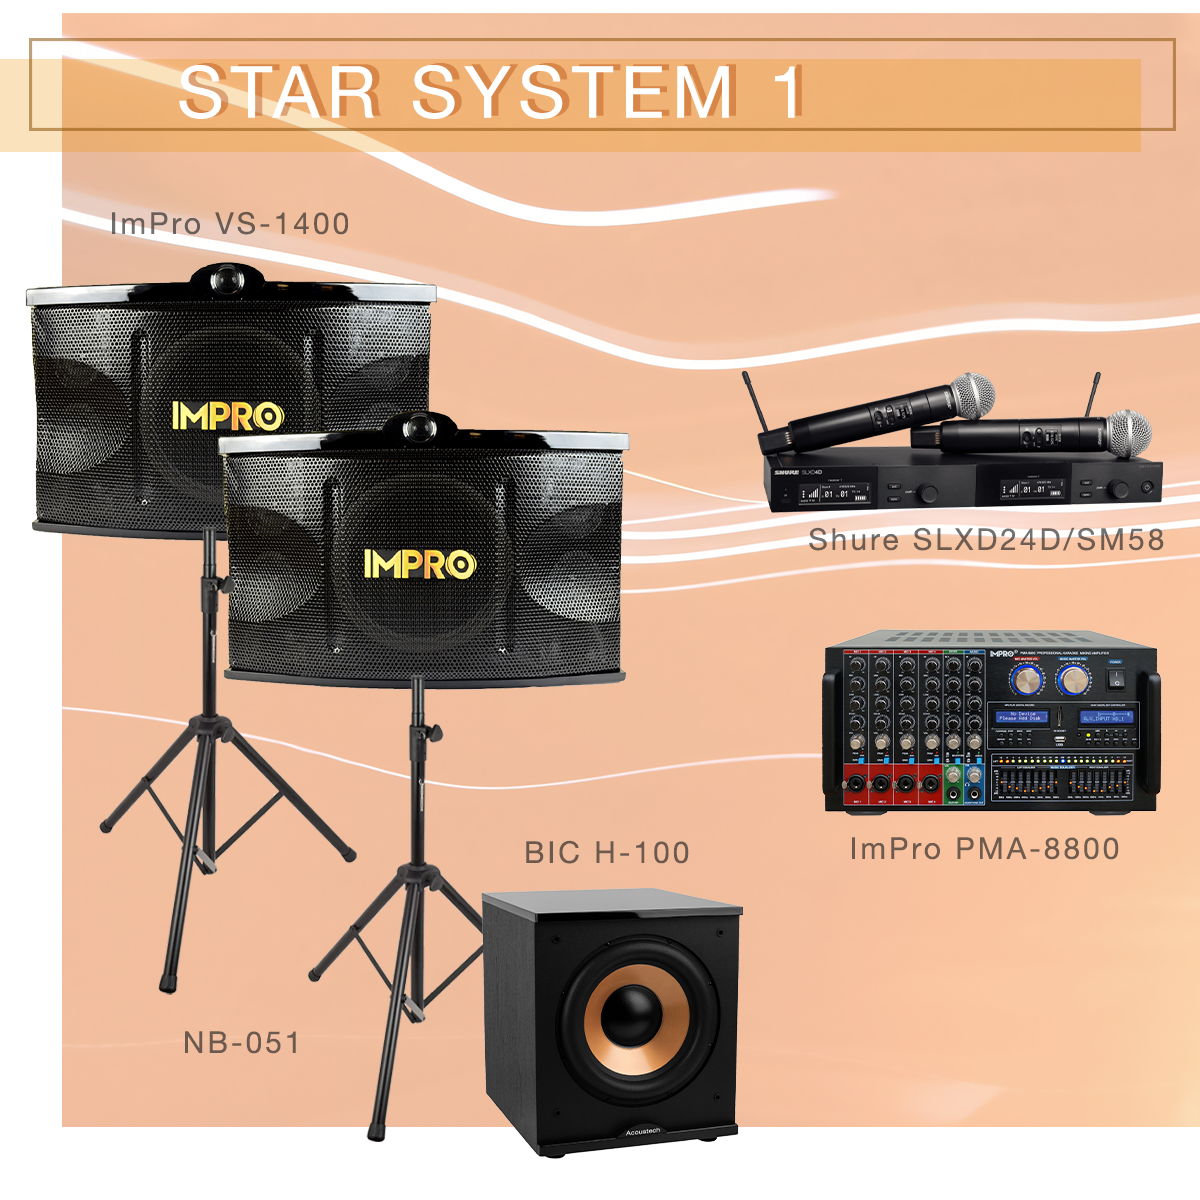 Star System 1 Karaoke Package with ImPro Speakers with Stands, Mixing Amplifier, and Shure Microphones